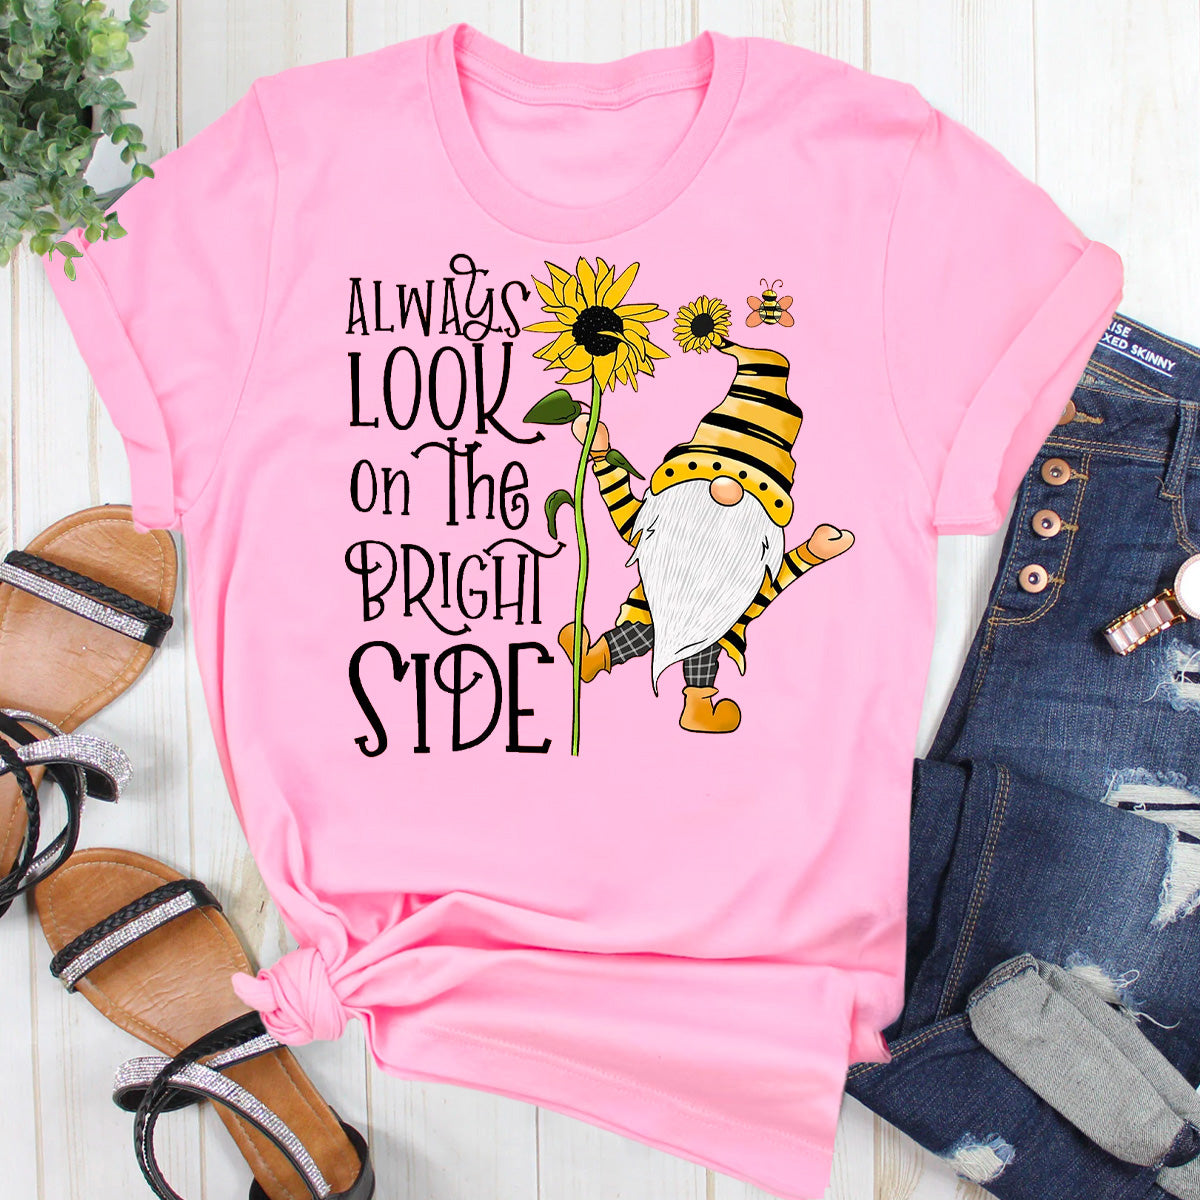 Always Look on the Bright Side Sunflower T-Shirt